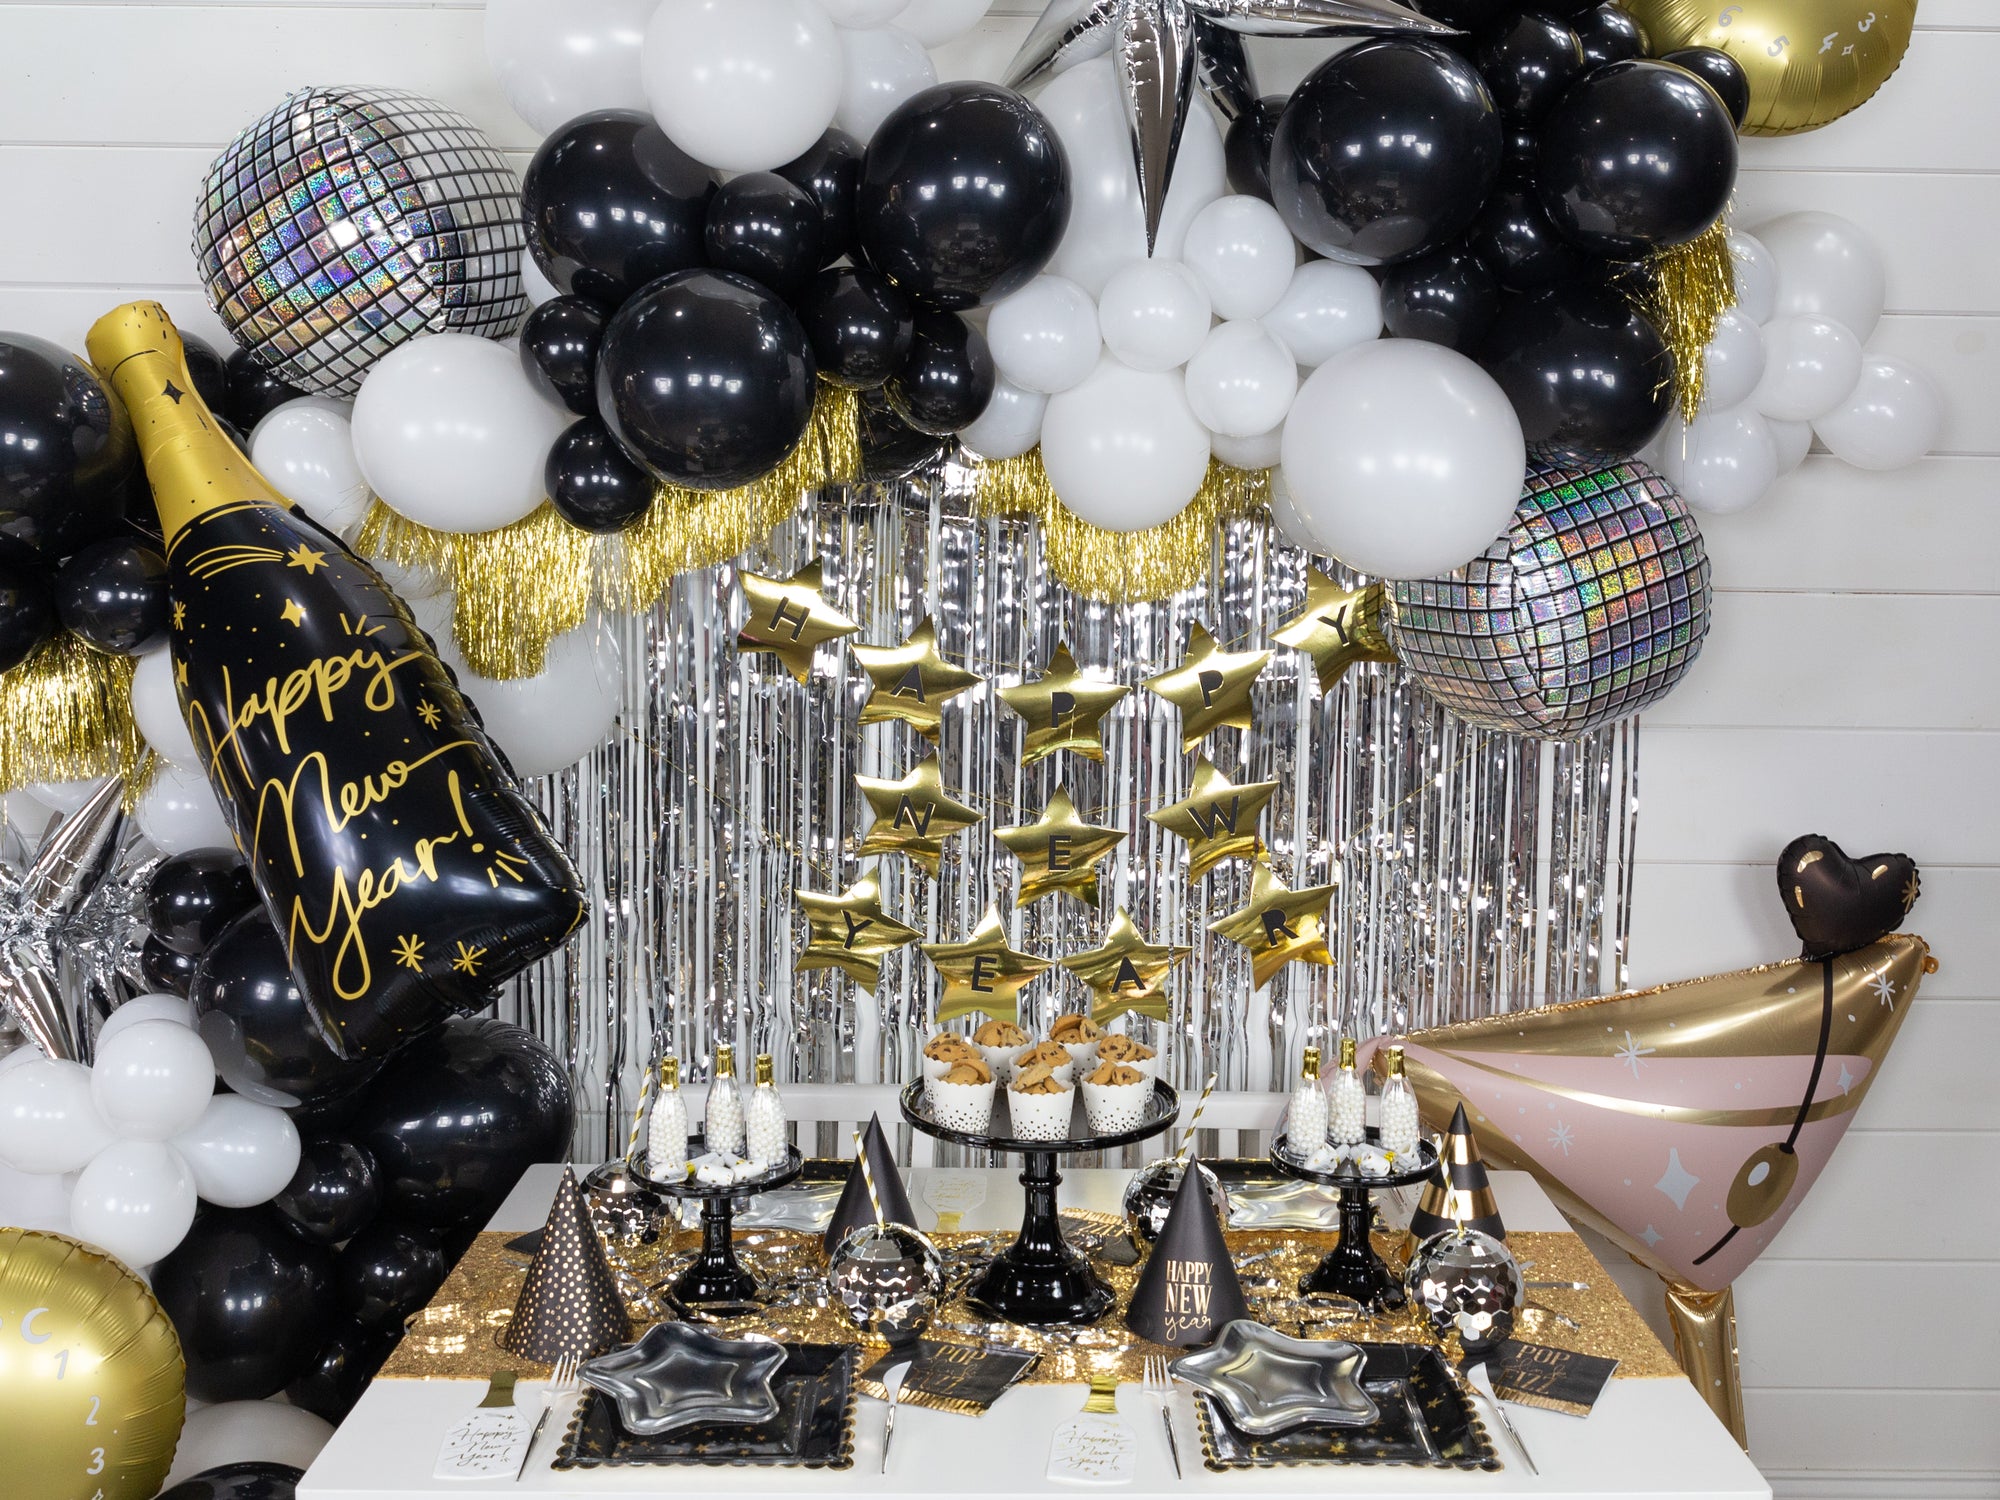 Ring in a Glamorous New Year